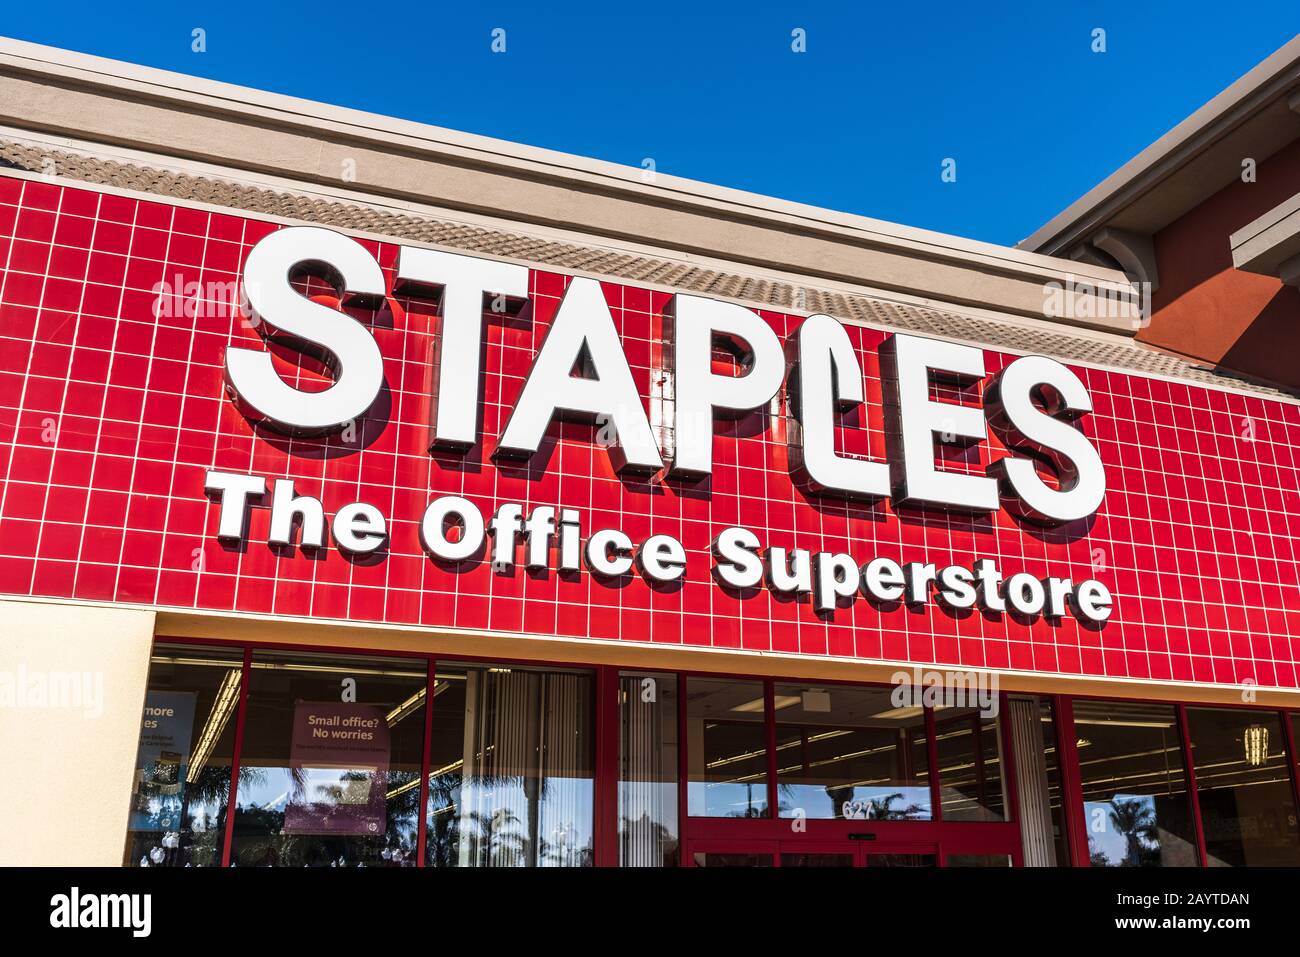 Feb 14 2020 Milpitas Ca Usa Staples The Office Superstore Sign Above The Entrance To One Of Their Locations In San Francisco Bay Area Staples 2AYTDAN 